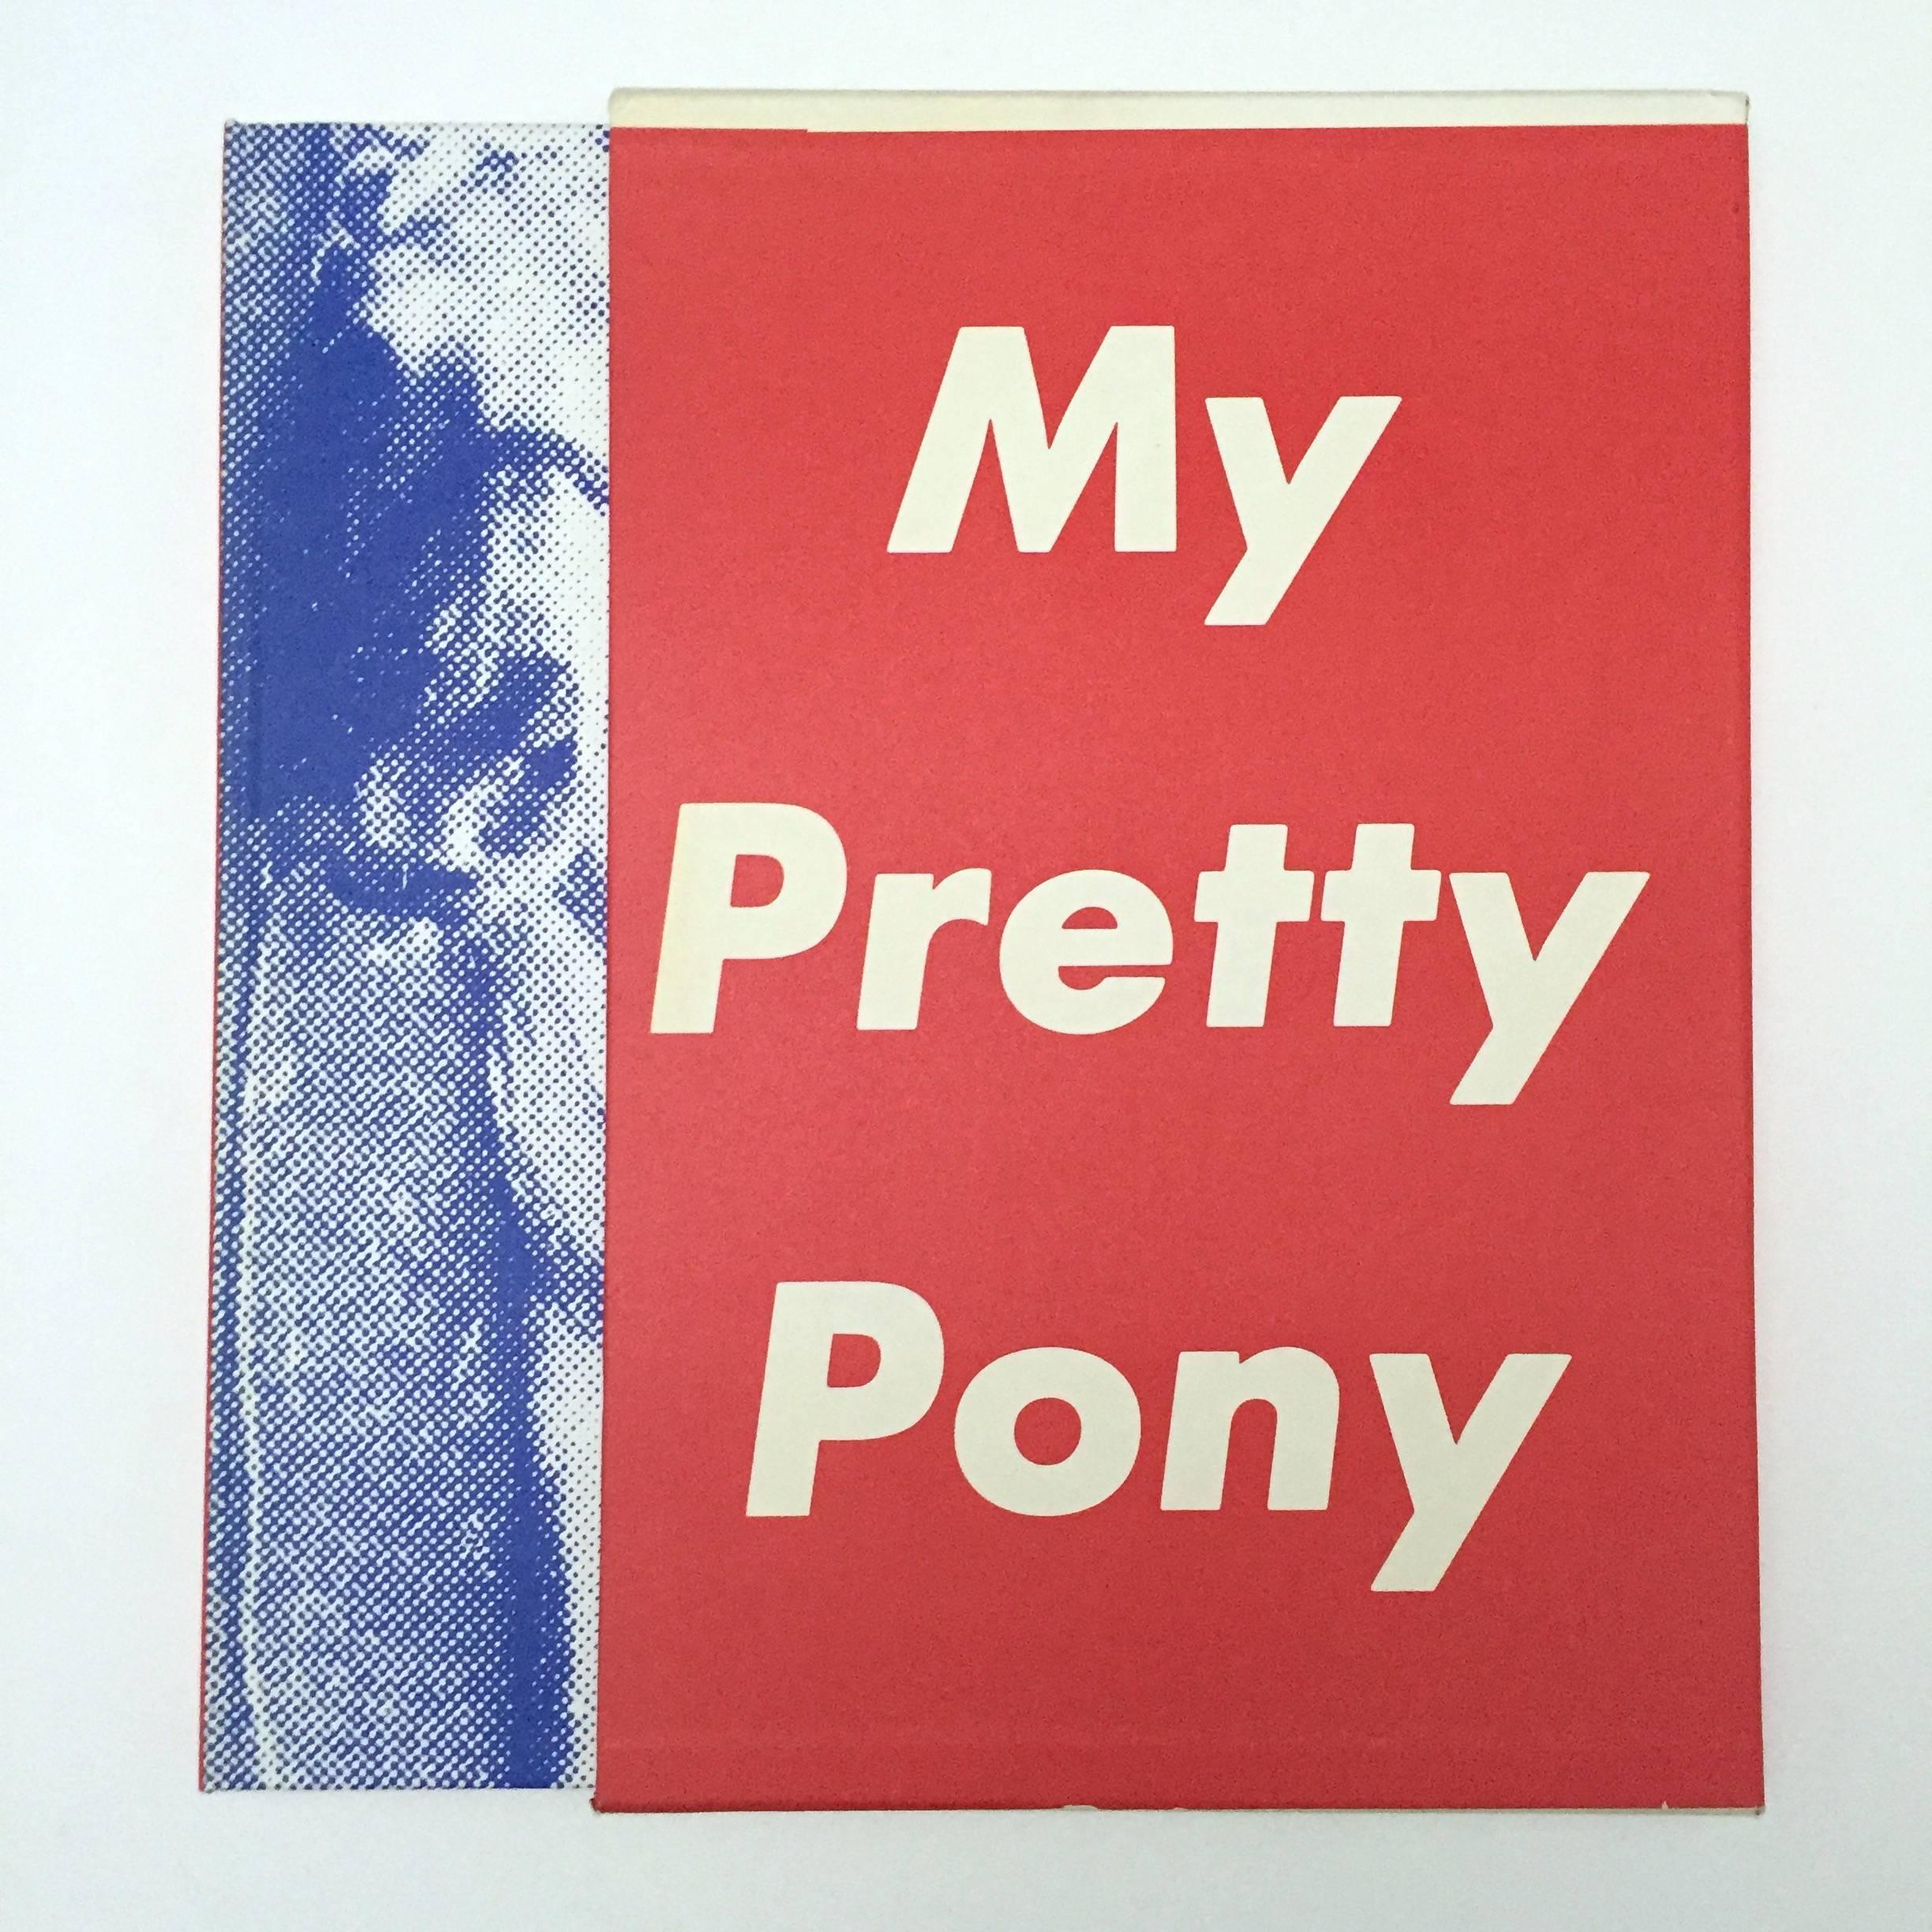 First trade edition, published by Alfred A. Knopf, 1989.

My Pretty Pony is a short story, written by Stephen King and illustrated by Barbara Kruger. King writes of an elderly man, nearing death, walking with his grandson while explaining the